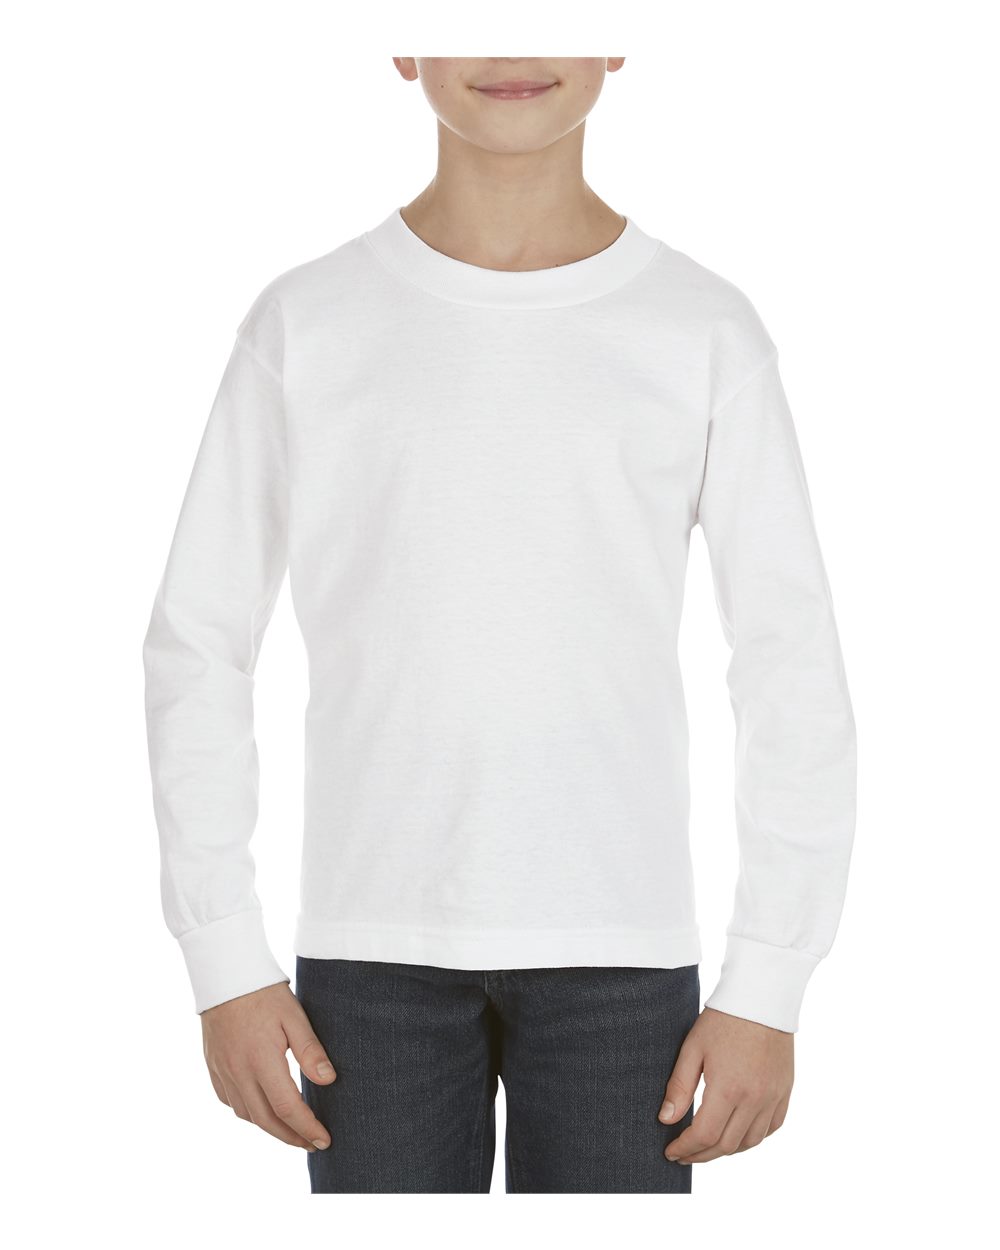 Alstyle 3384 - Classic Youth Long Sleeve Tee